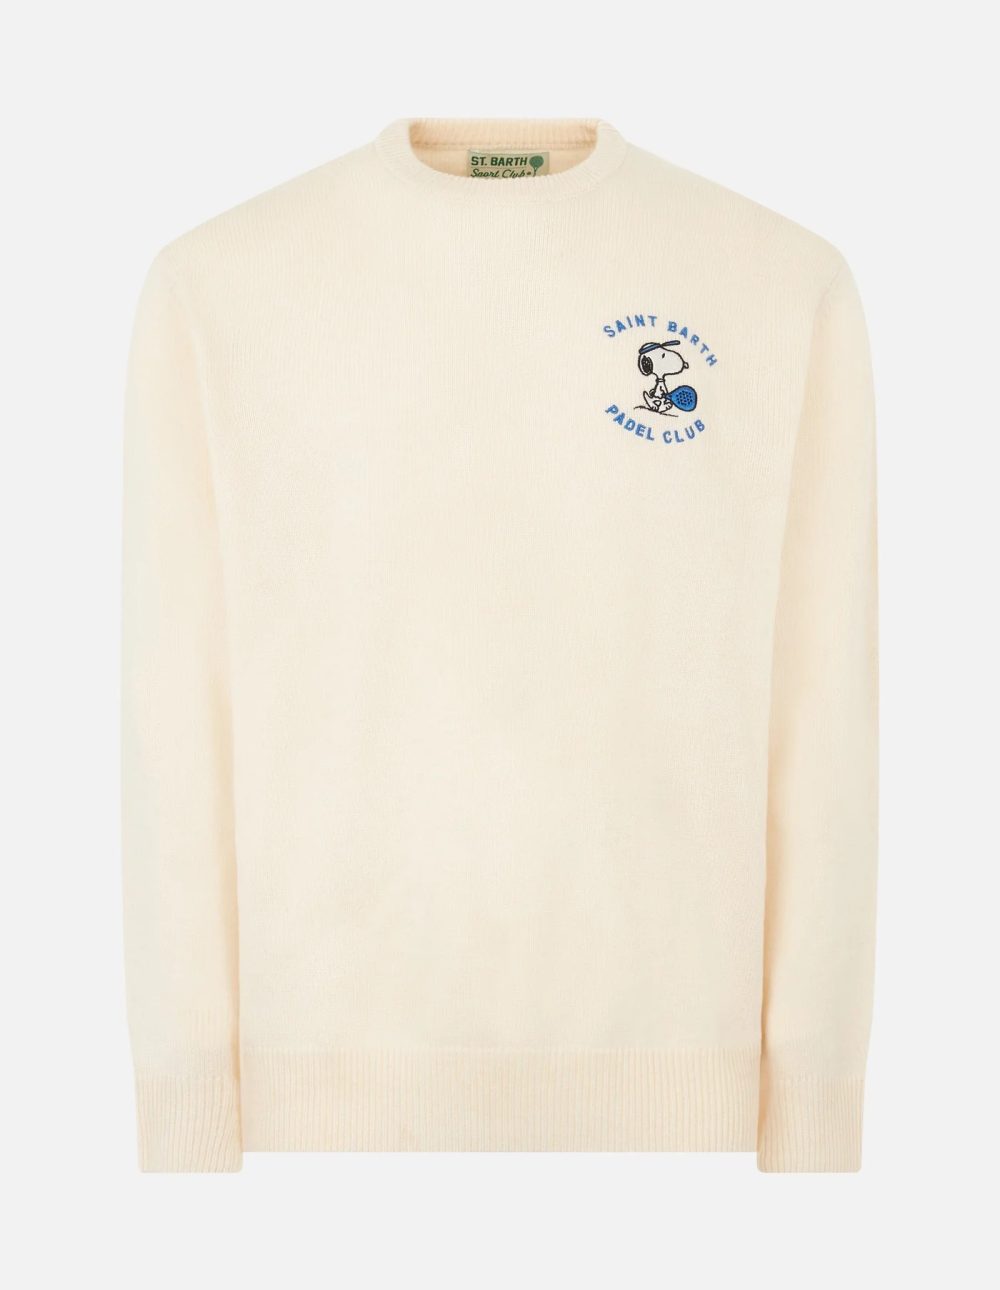 HER0001_10674E_man-sweater-snoopy-white-padel-4_1400x